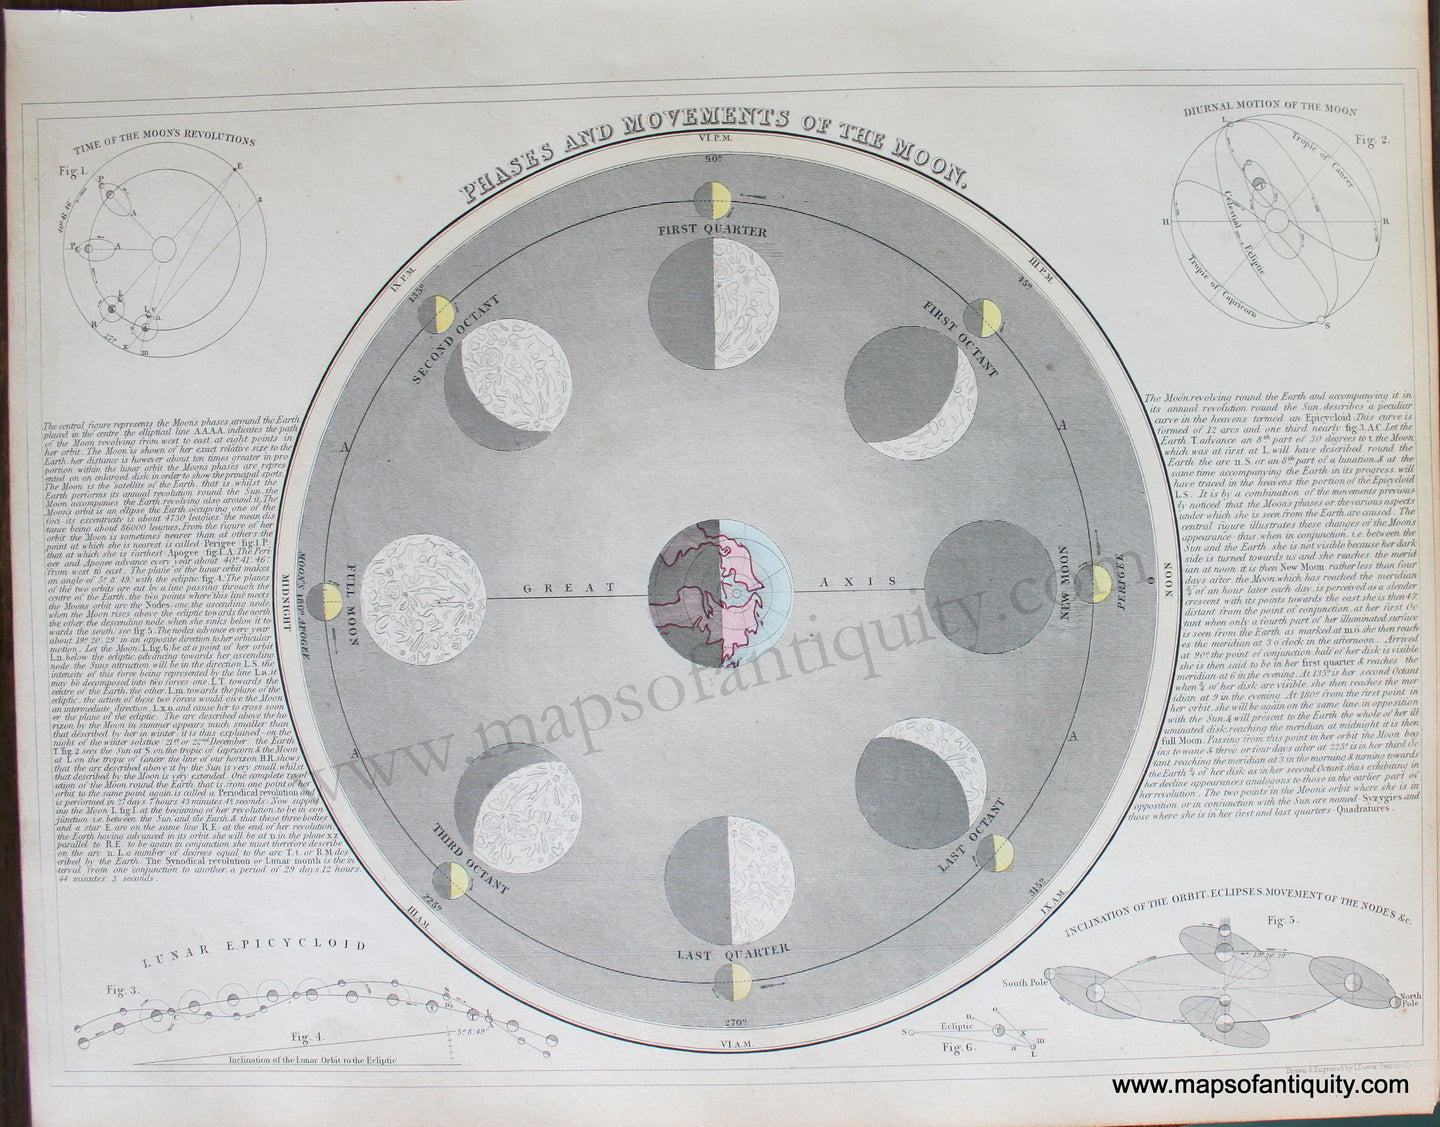 Genuine-Antique-Map-Phases-and-Movements-of-the-Moon-Celestial--1850-Petermann-/-Orr-/-Dower-Maps-Of-Antiquity-1800s-19th-century